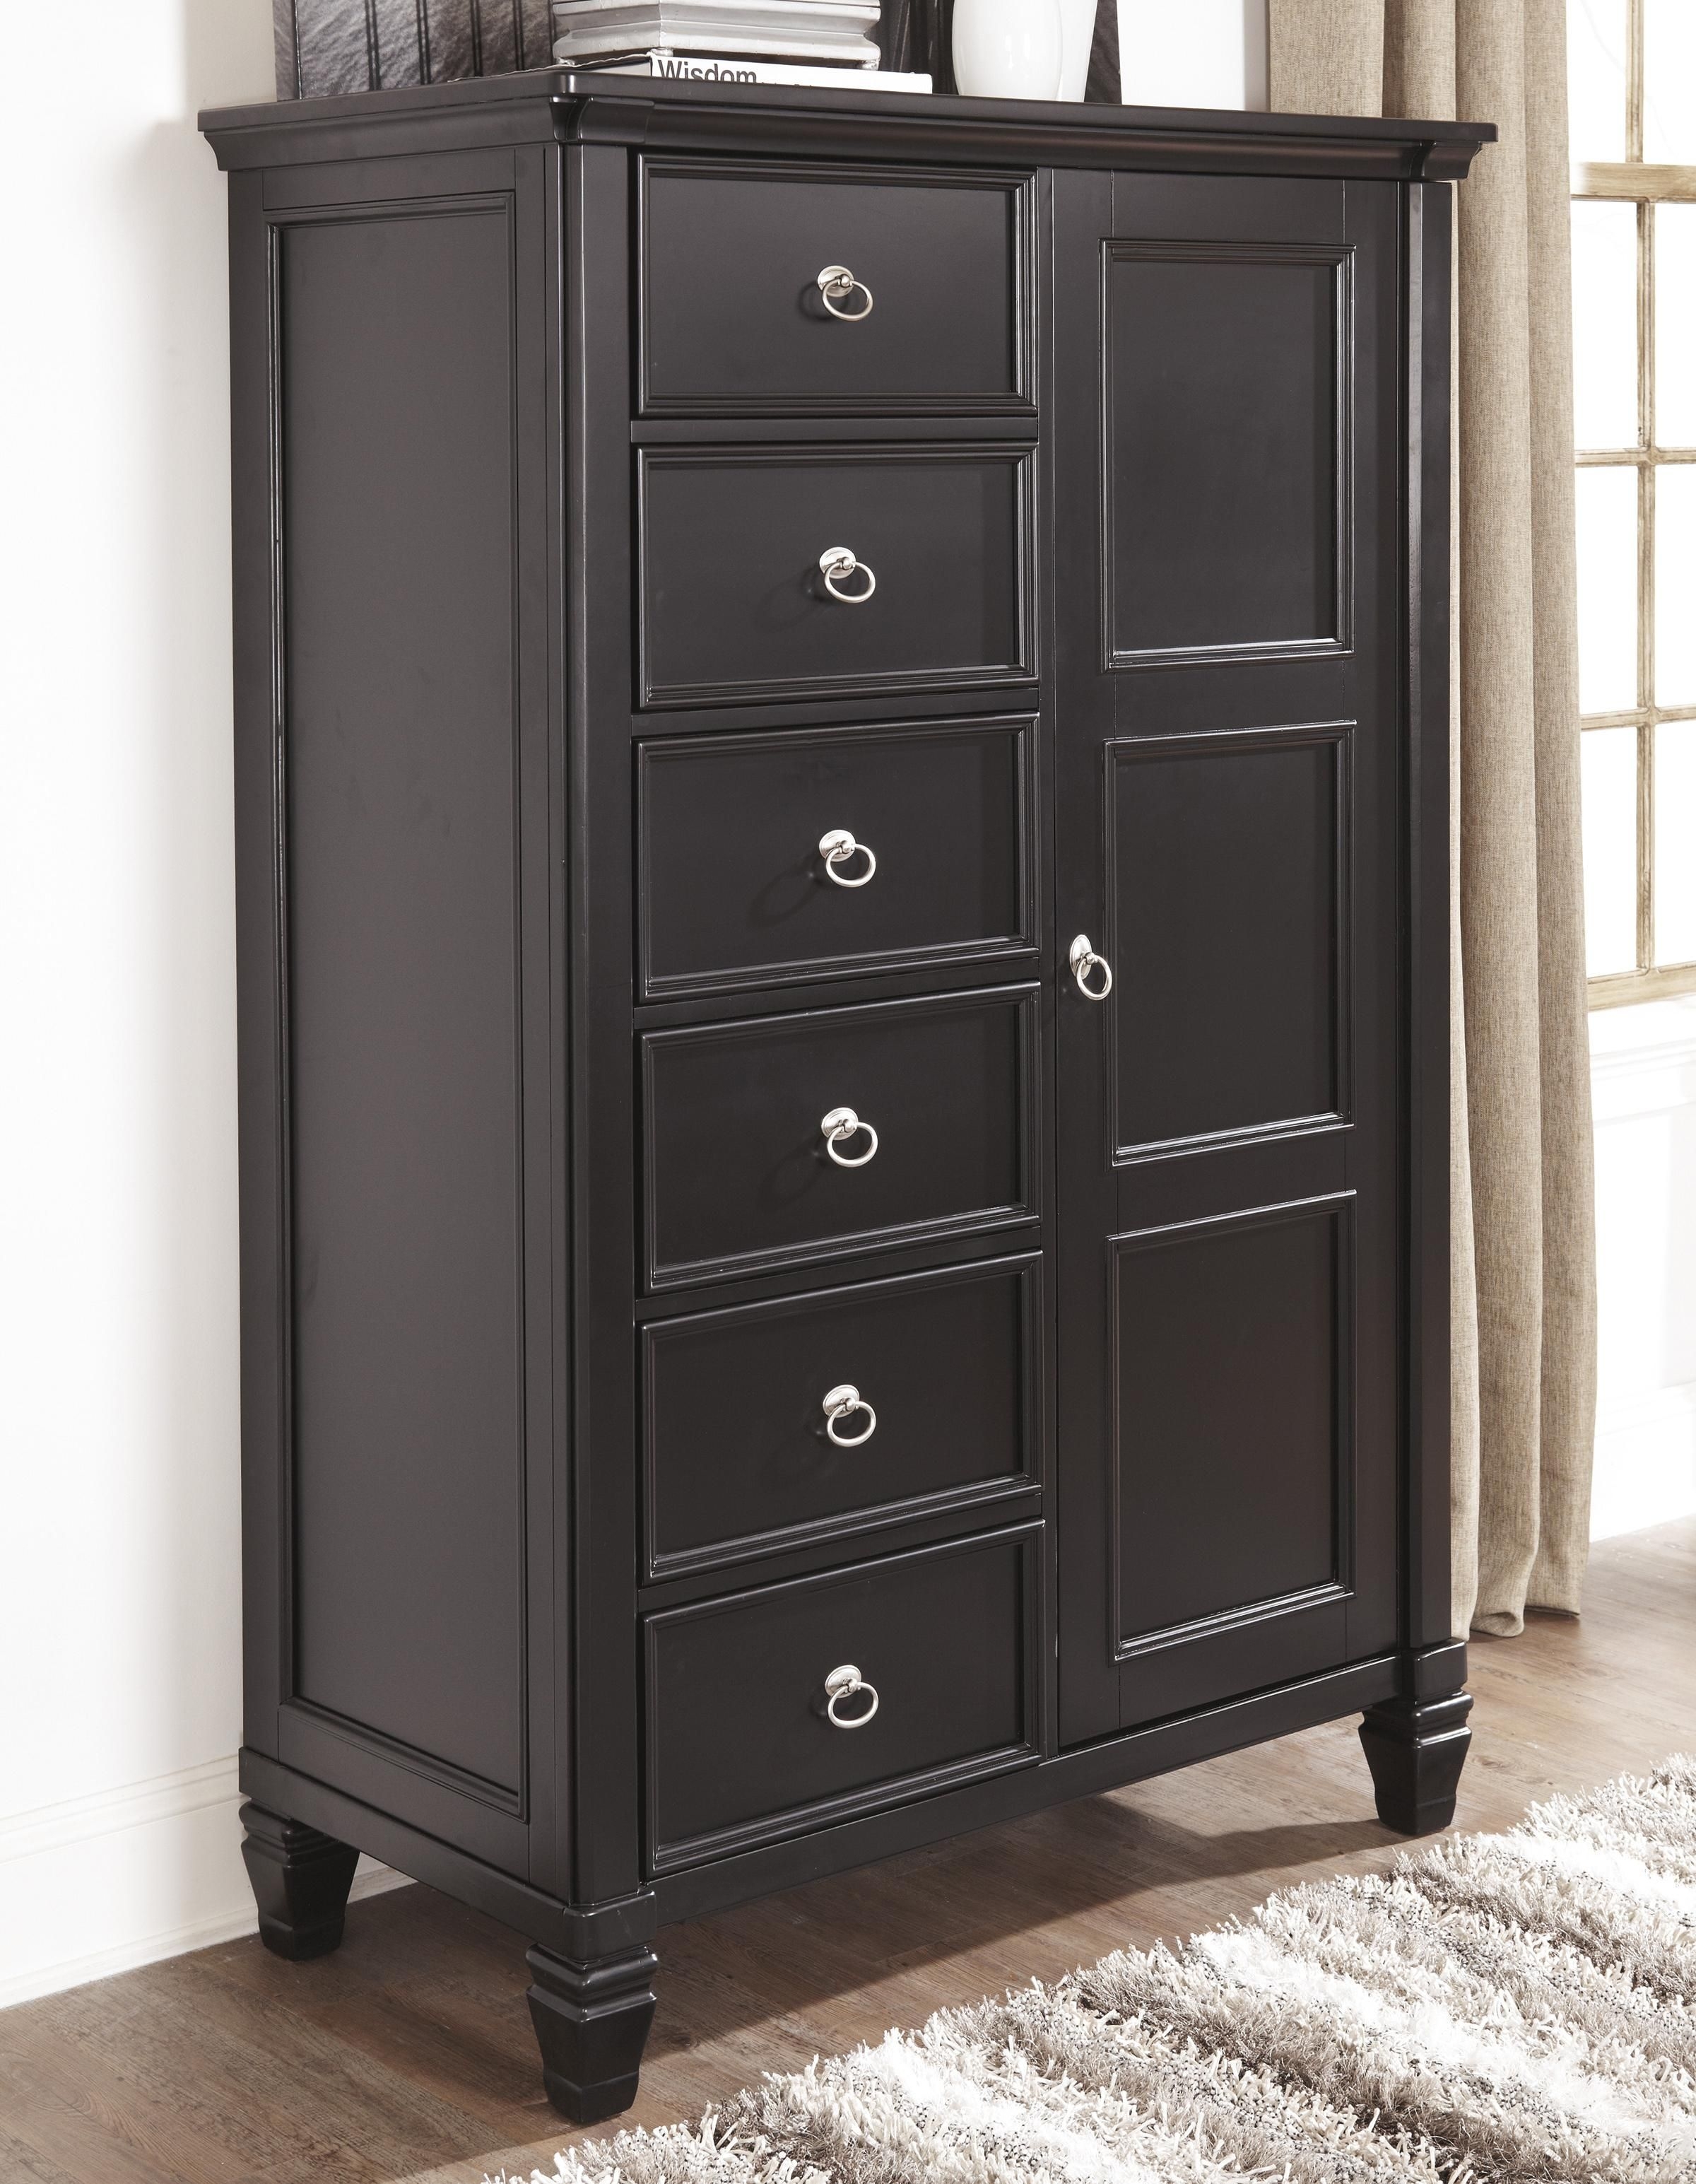 Greensburg transitional door chest with shelves and interior drawers